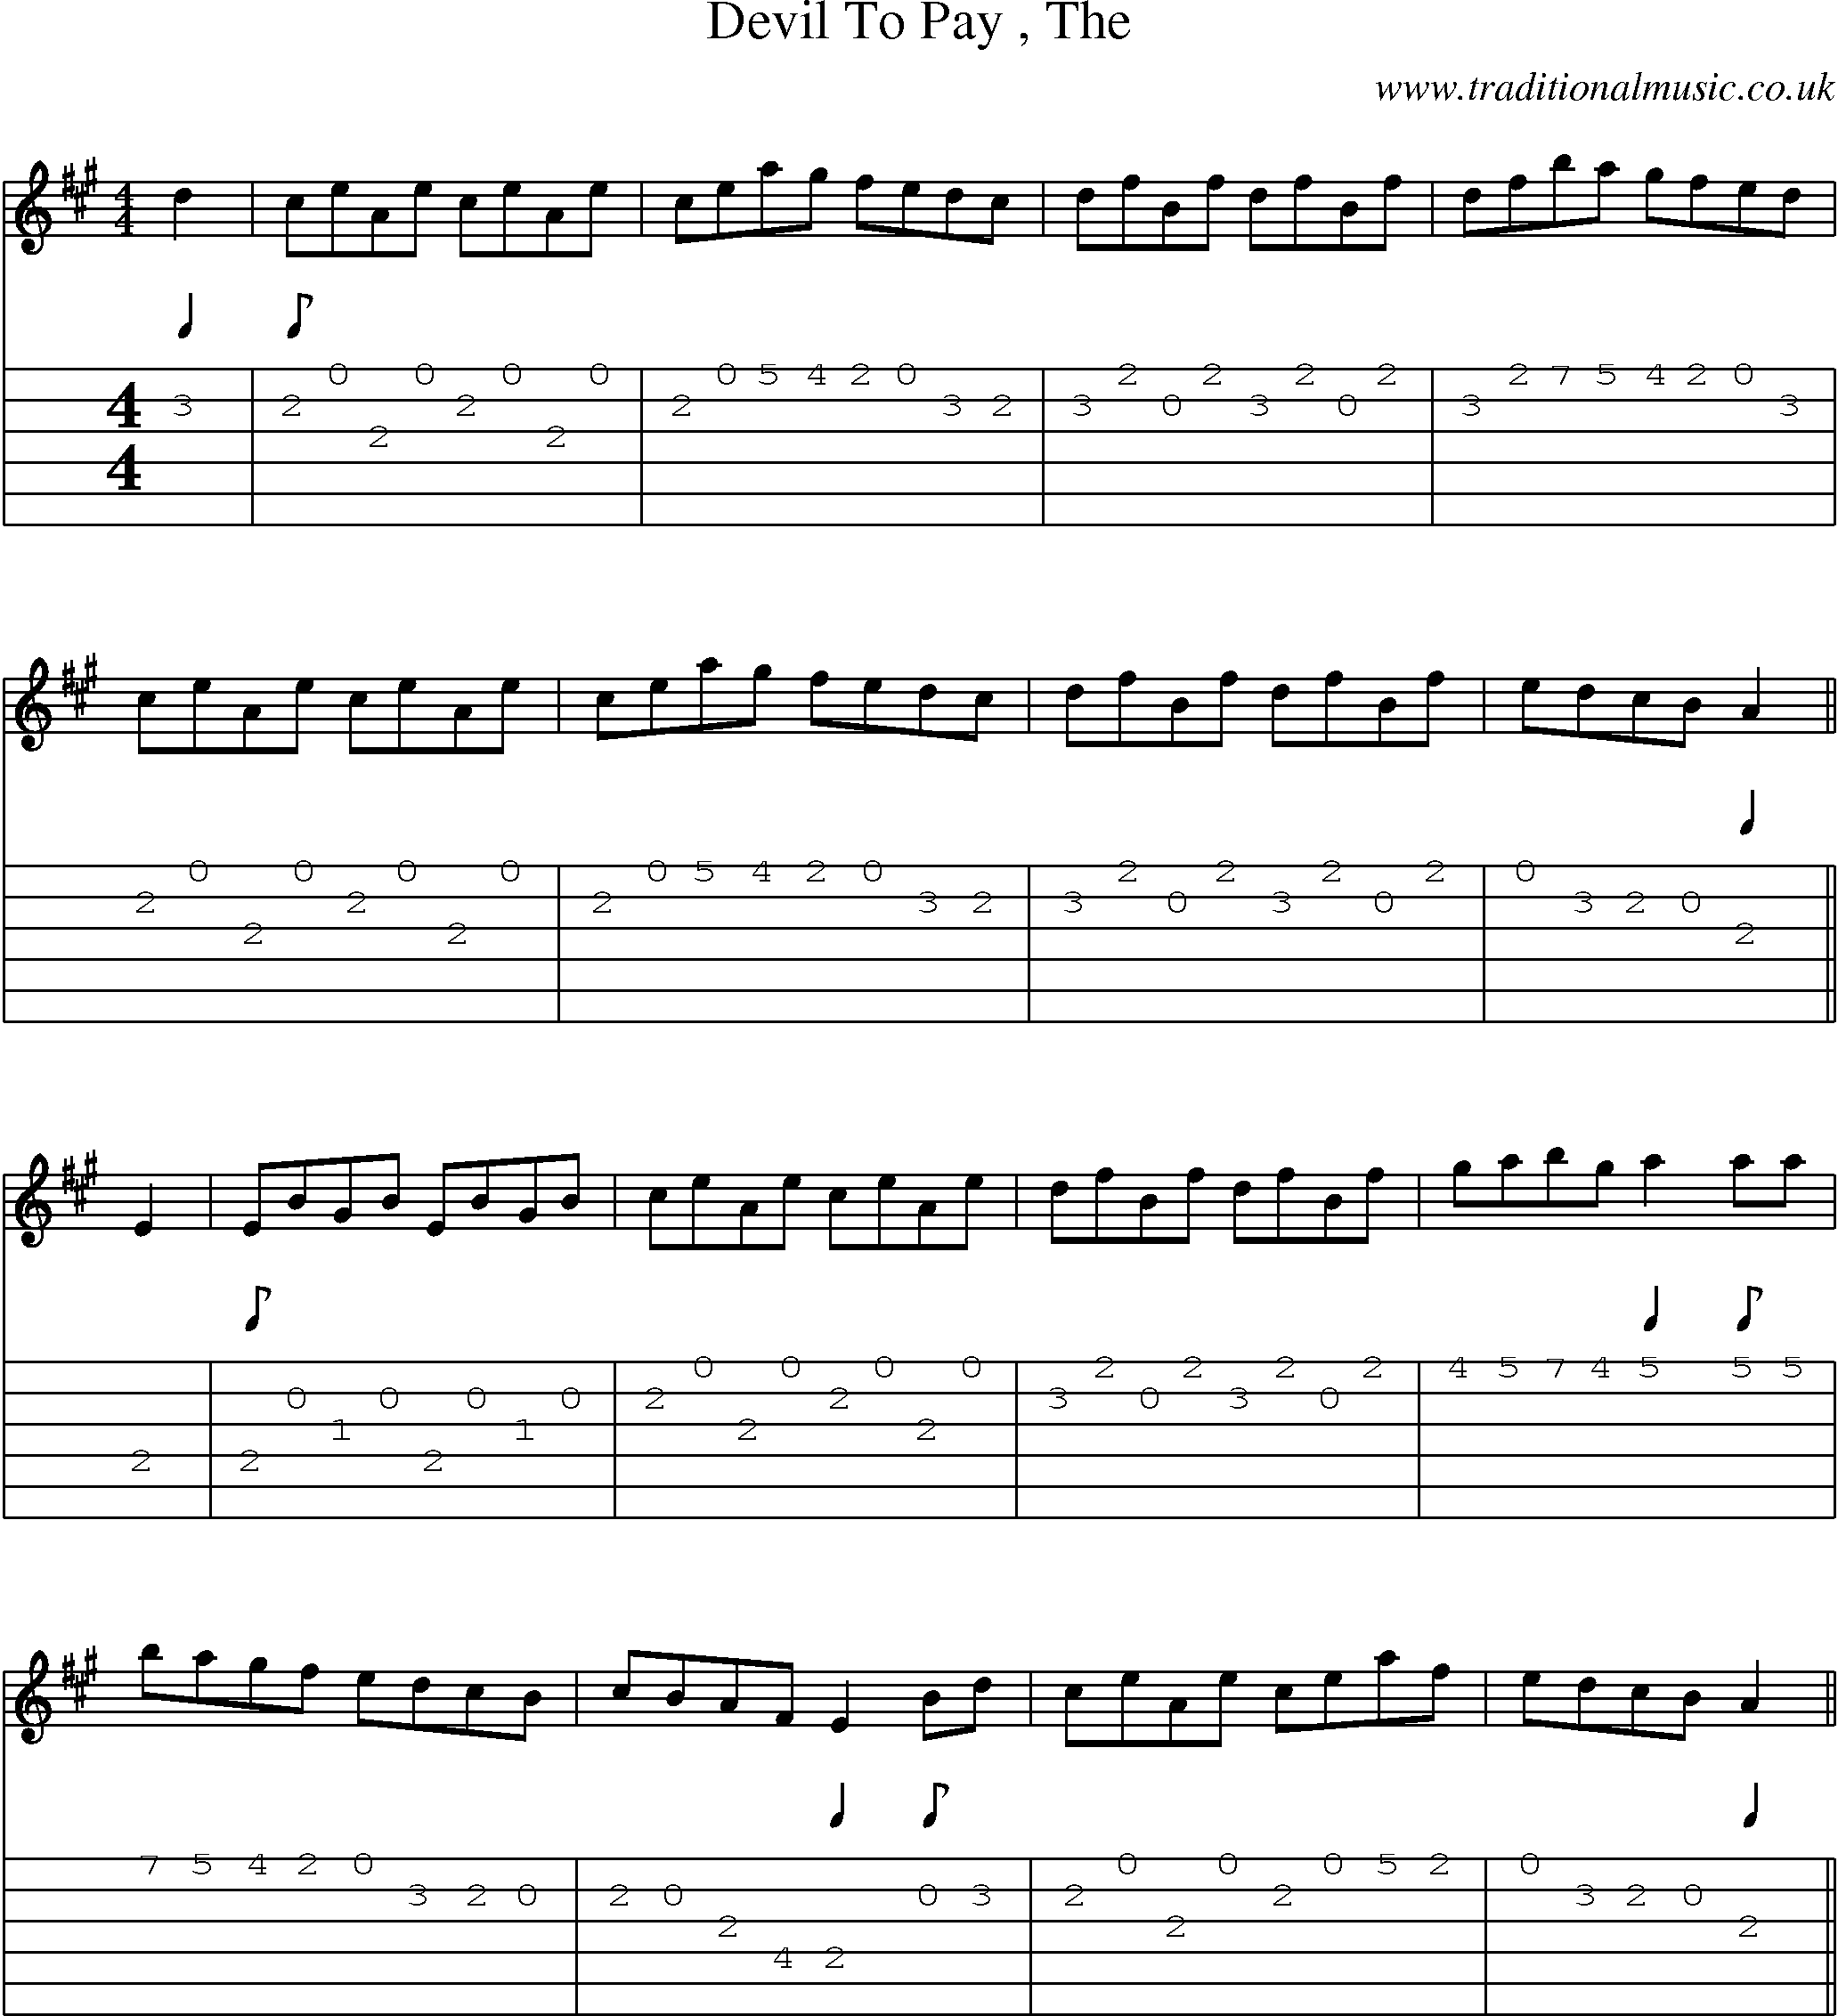 Music Score and Guitar Tabs for Devil To Pay